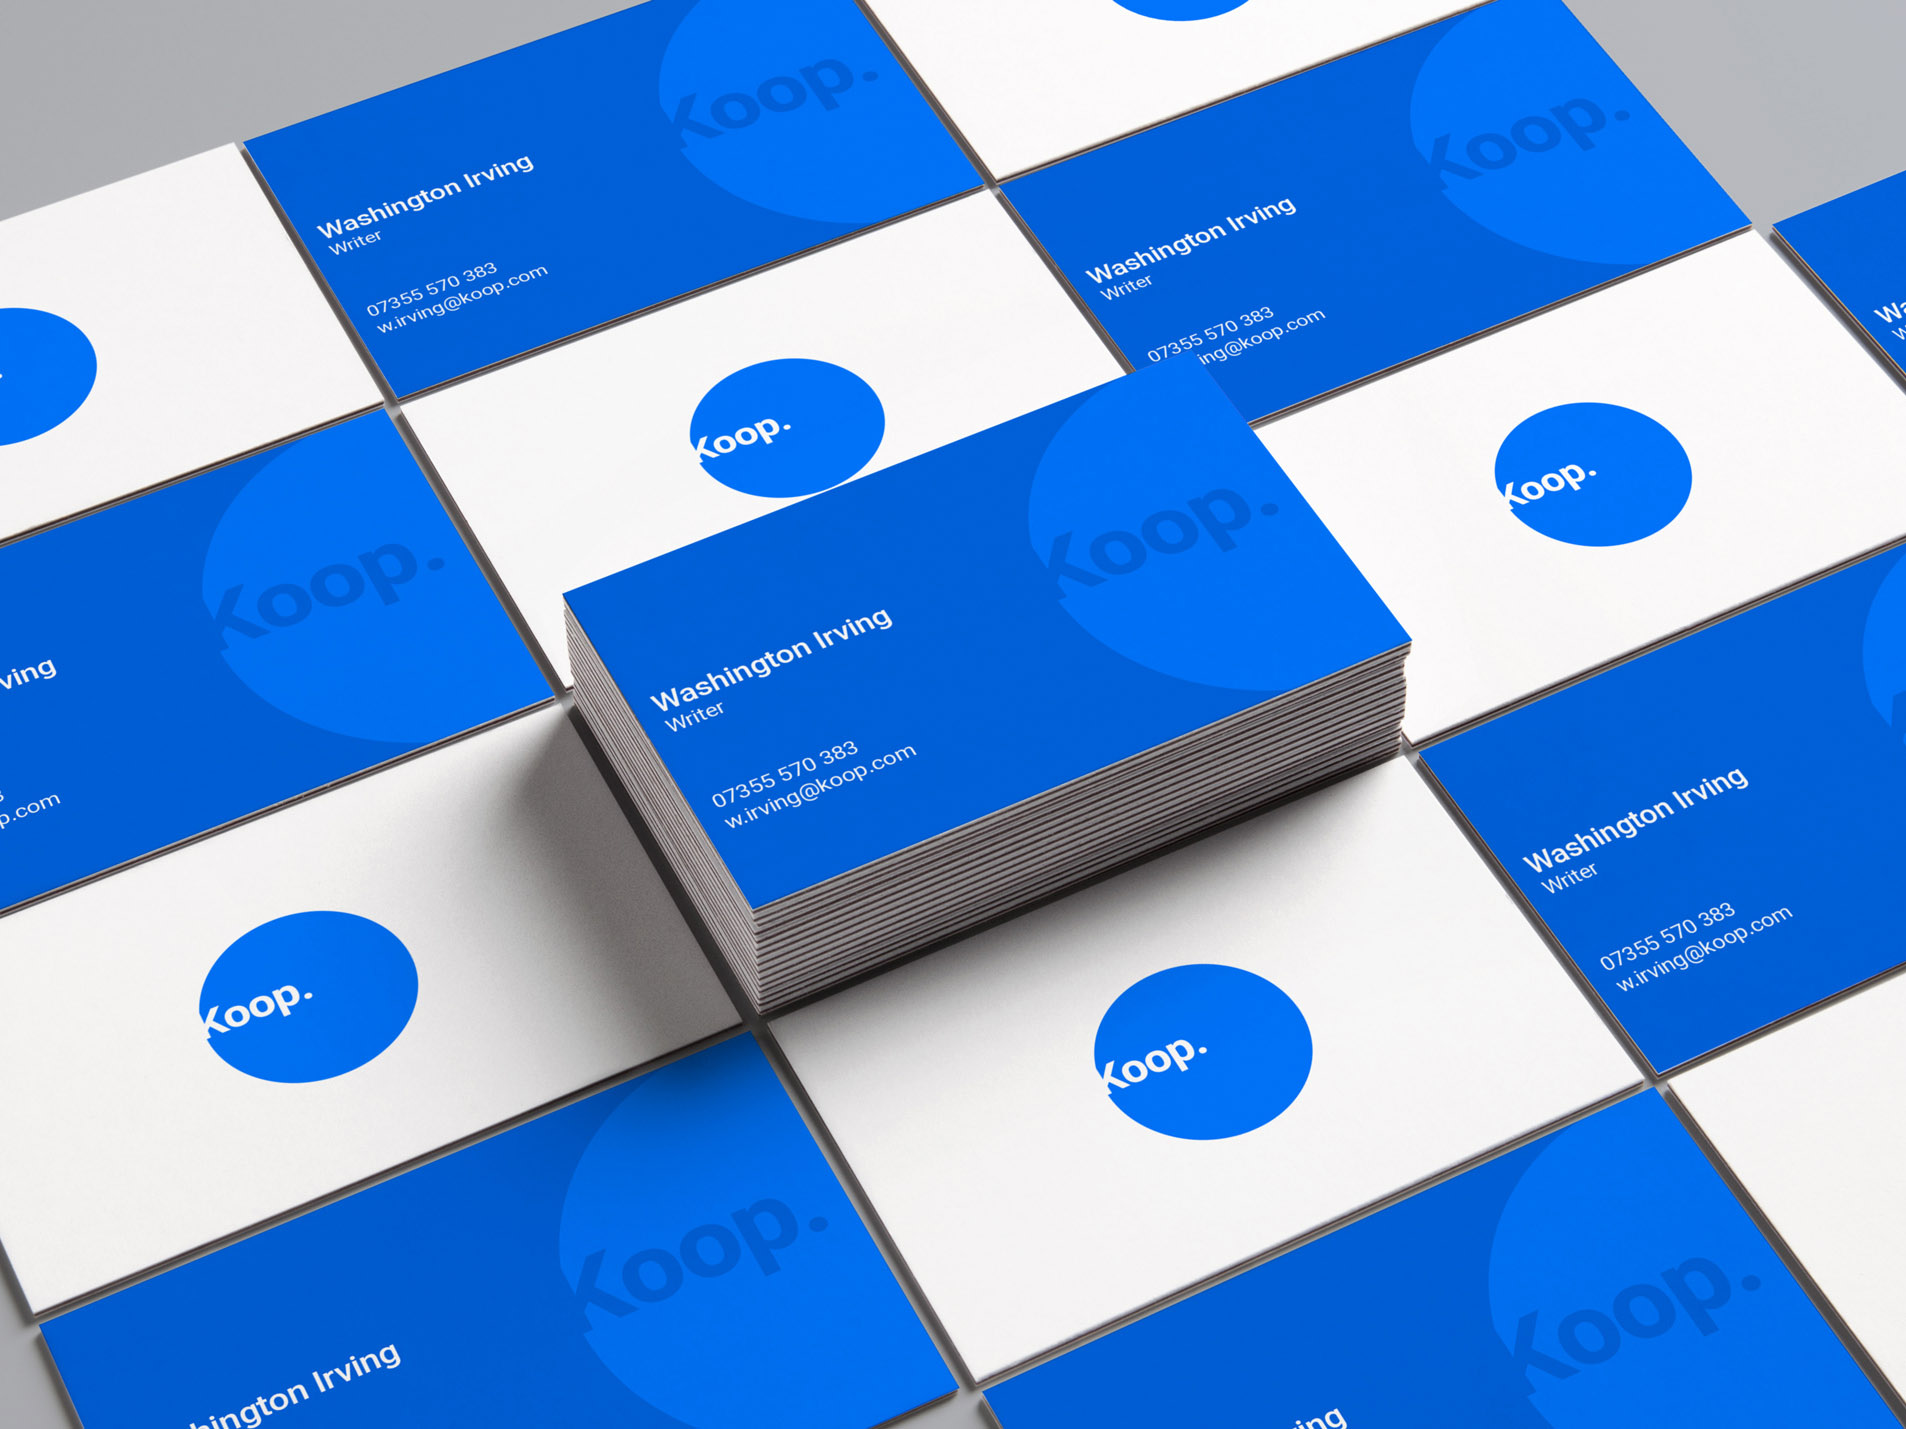 An example of the Koop branding on business cards